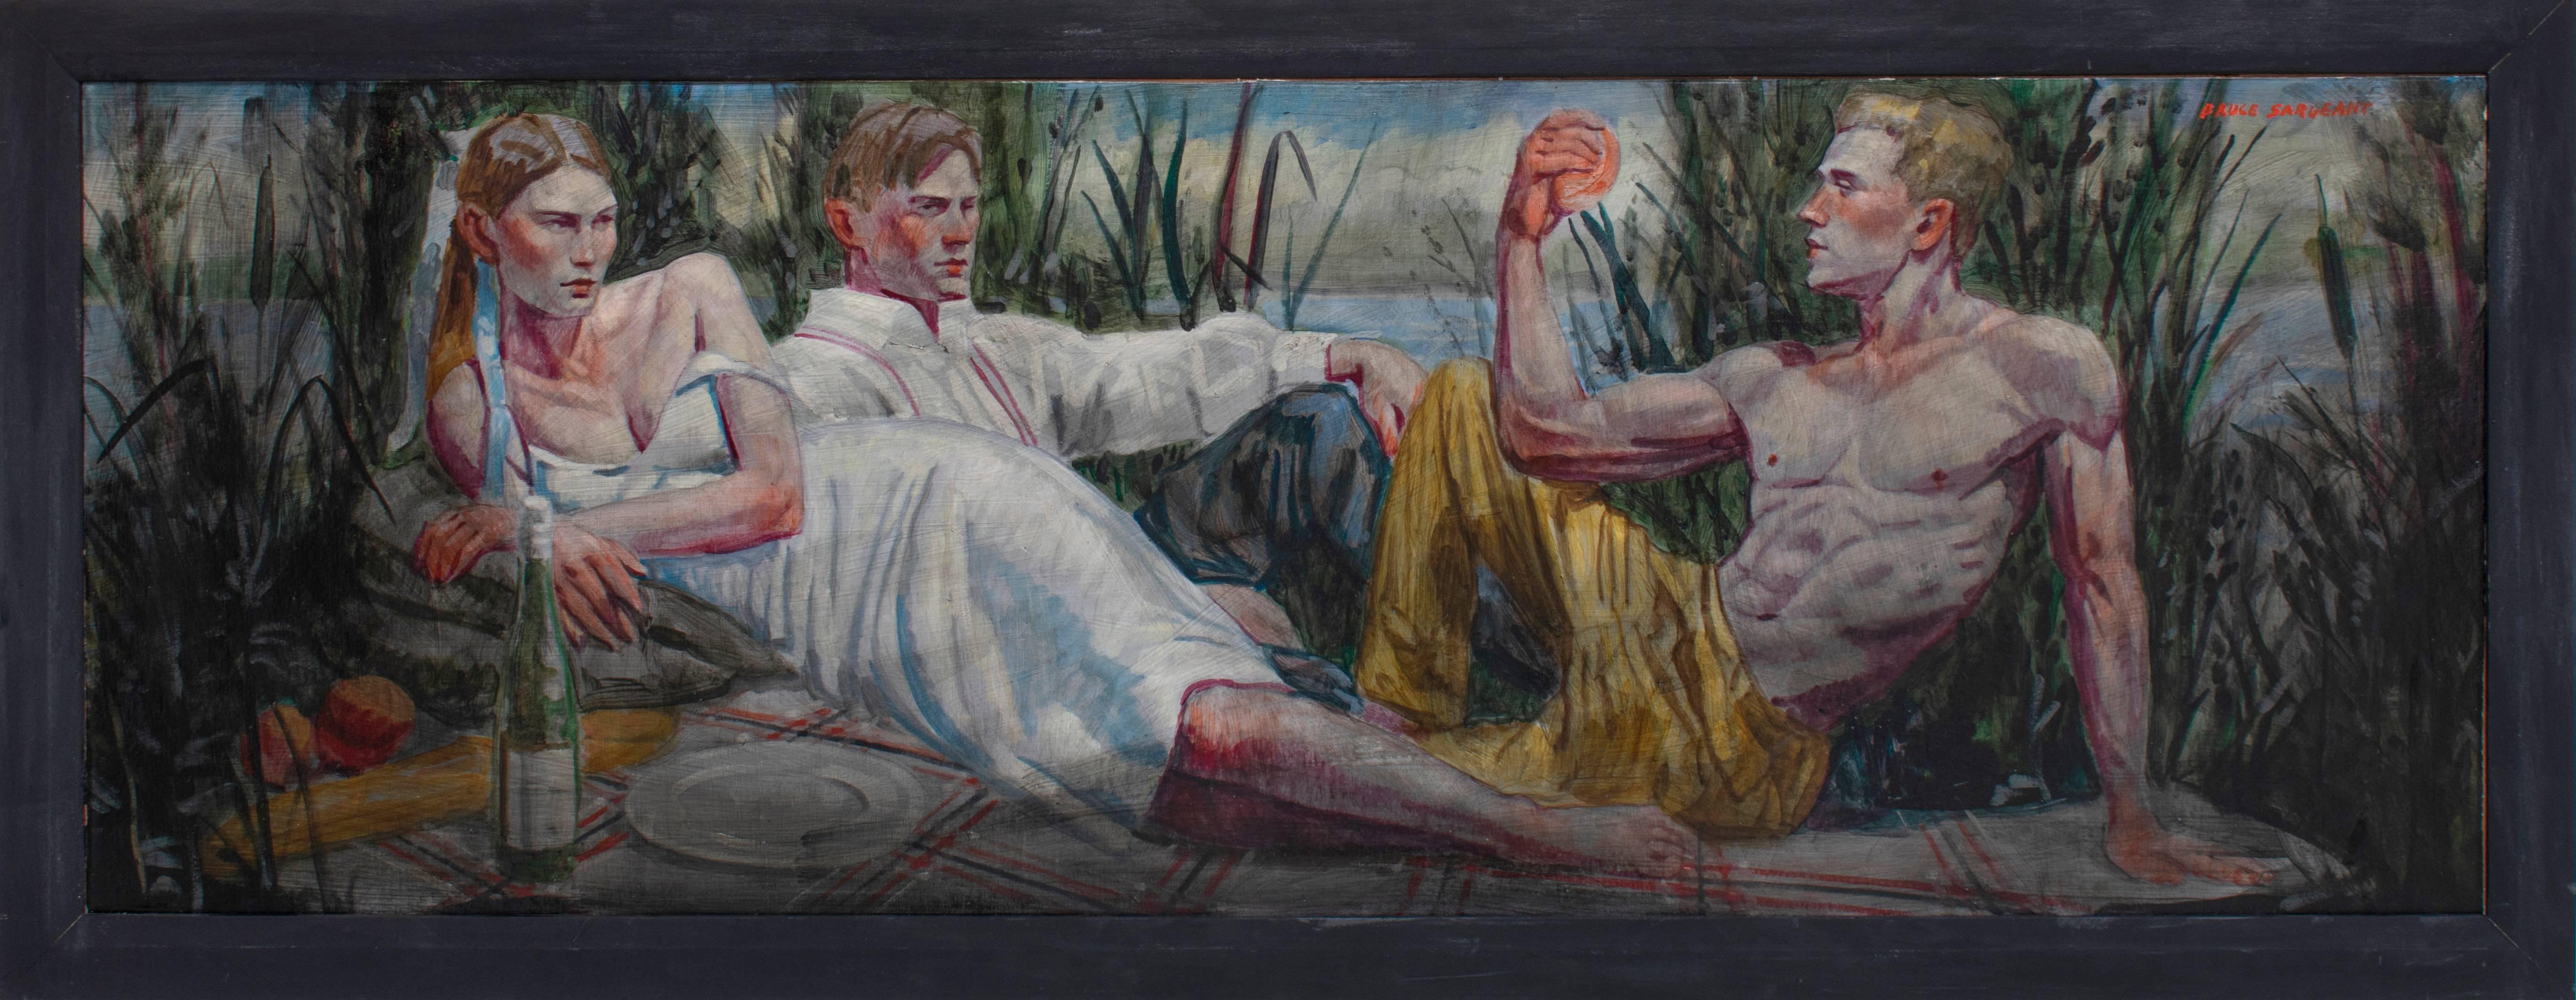 The Picnic (Large Figurative Painting on Canvas of Two Men and a Woman) 1